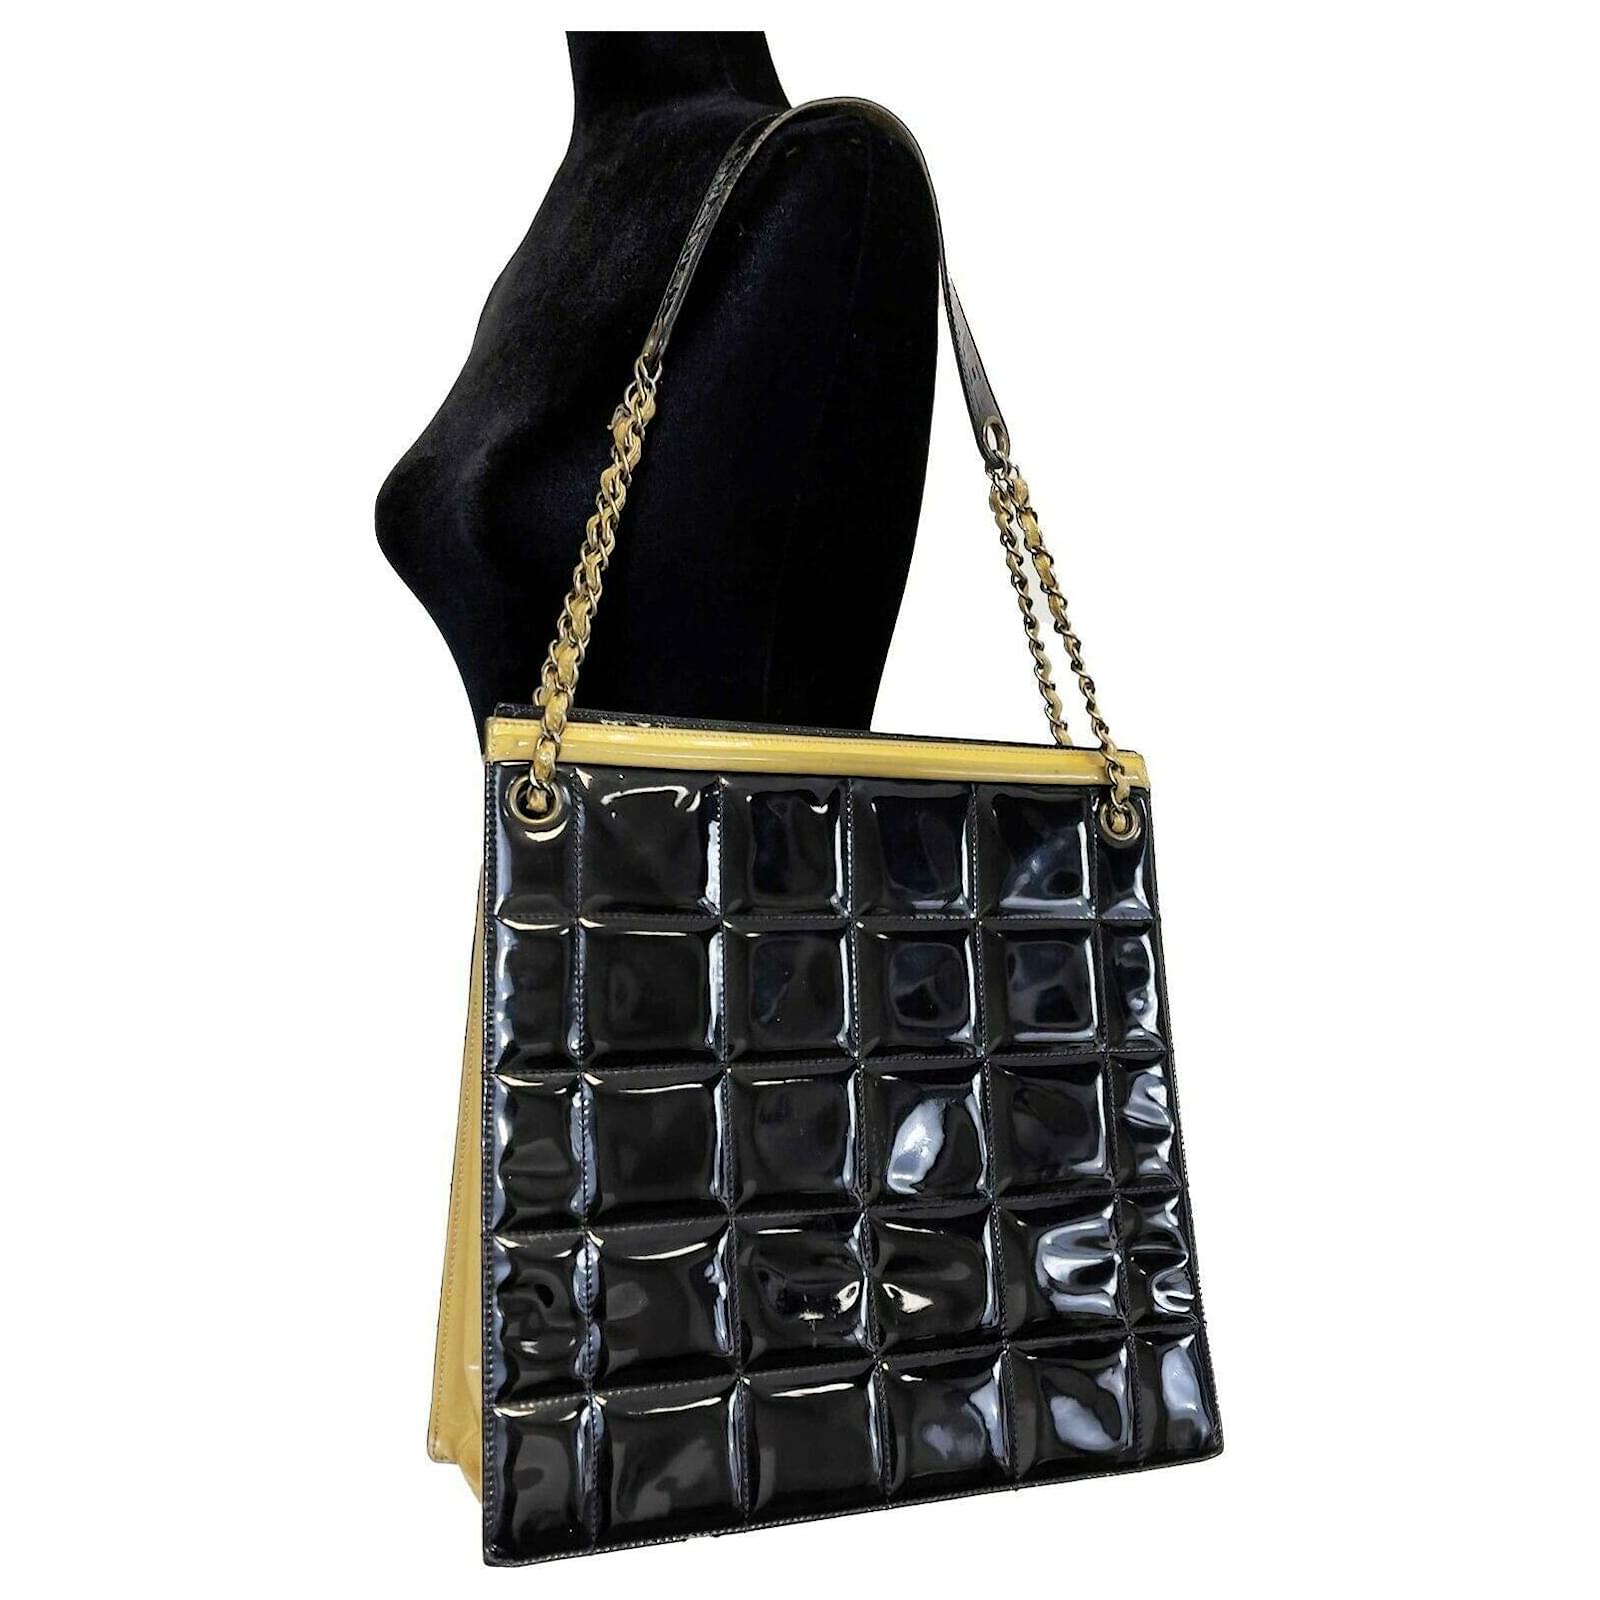 Chanel - 2000 Black Lax Square Leather Tote - Chanel Embossed